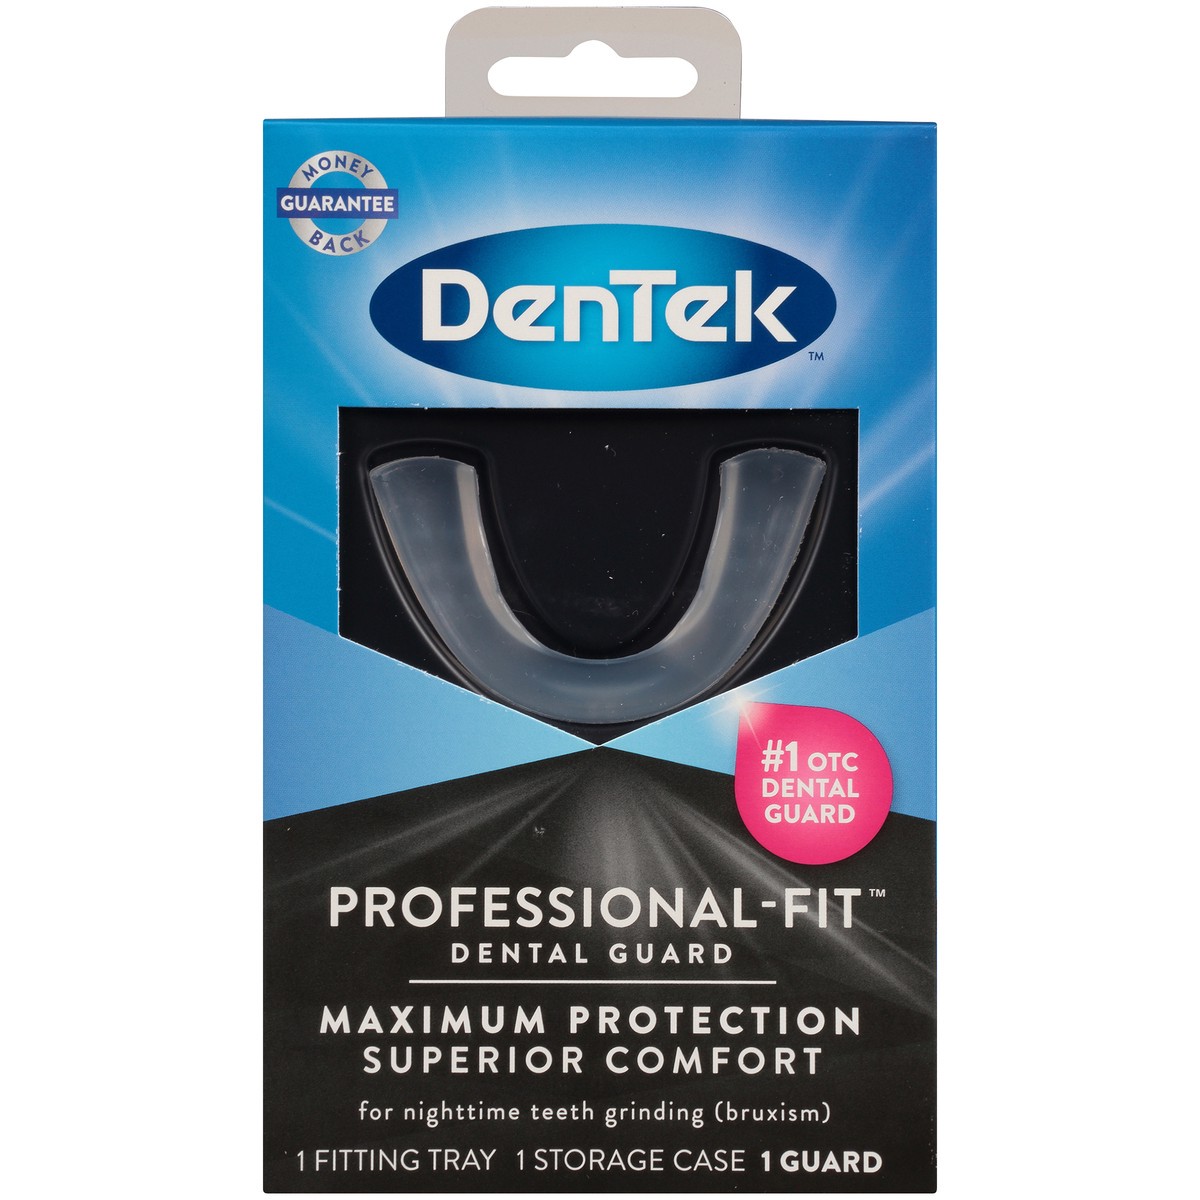 slide 4 of 9, DenTek Professional-Fit Dental Guard for Nighttime Teeth Grinding with Guard, Fitting Tray, & Storage Case, 1 ct